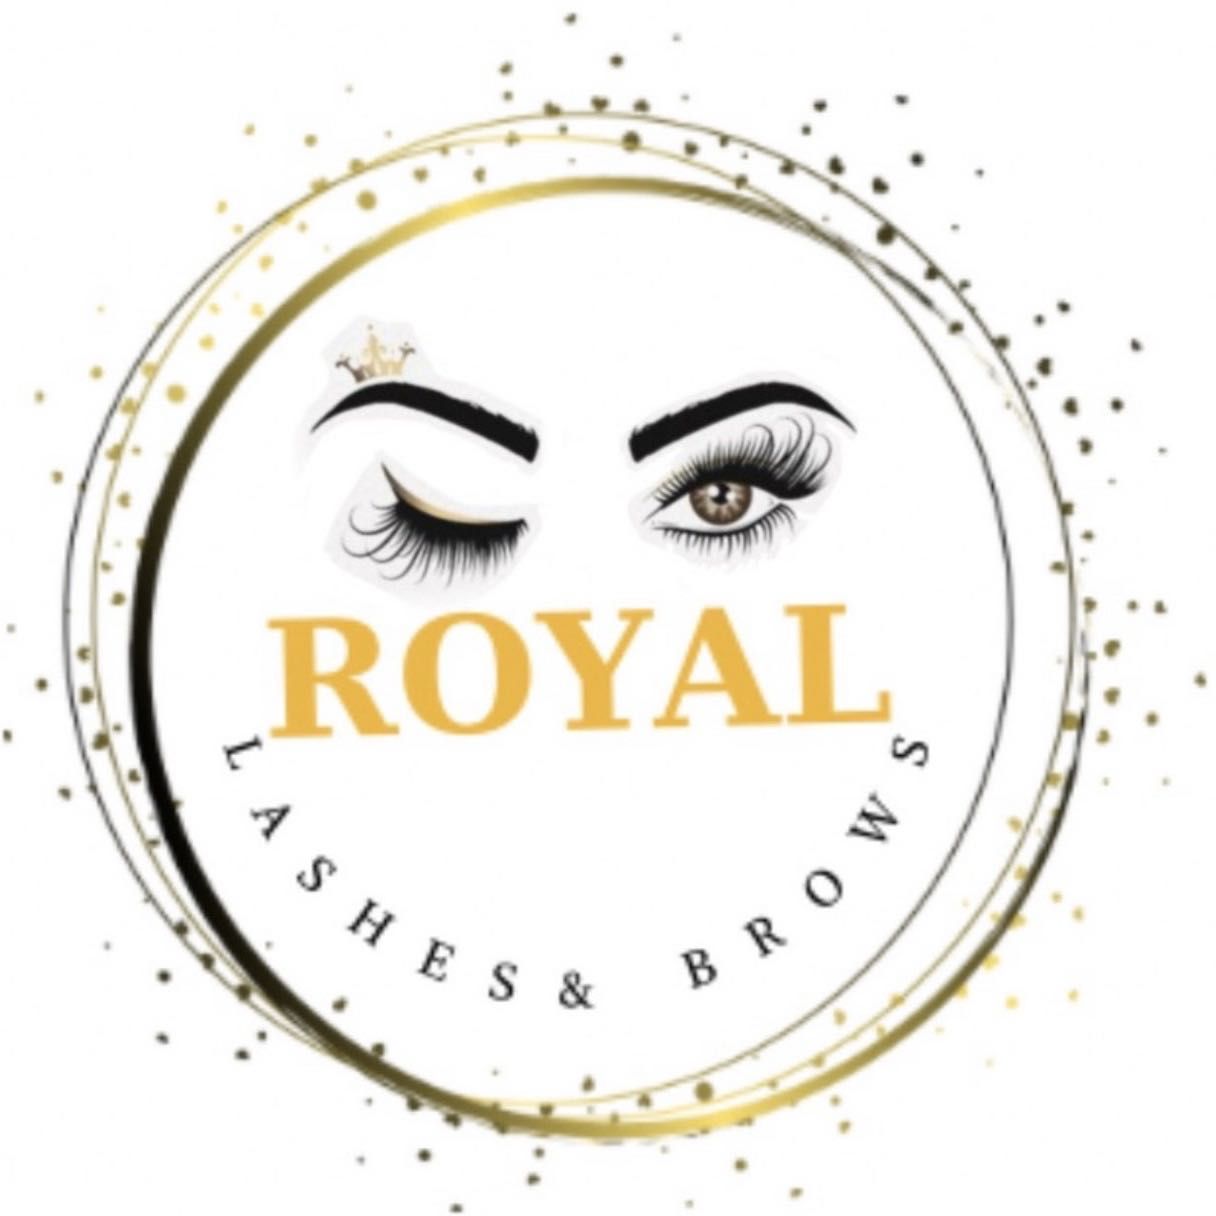 Royal Lashes and Brows, 17189 Bear Valley Rd ste 160, Hesperia, 92345